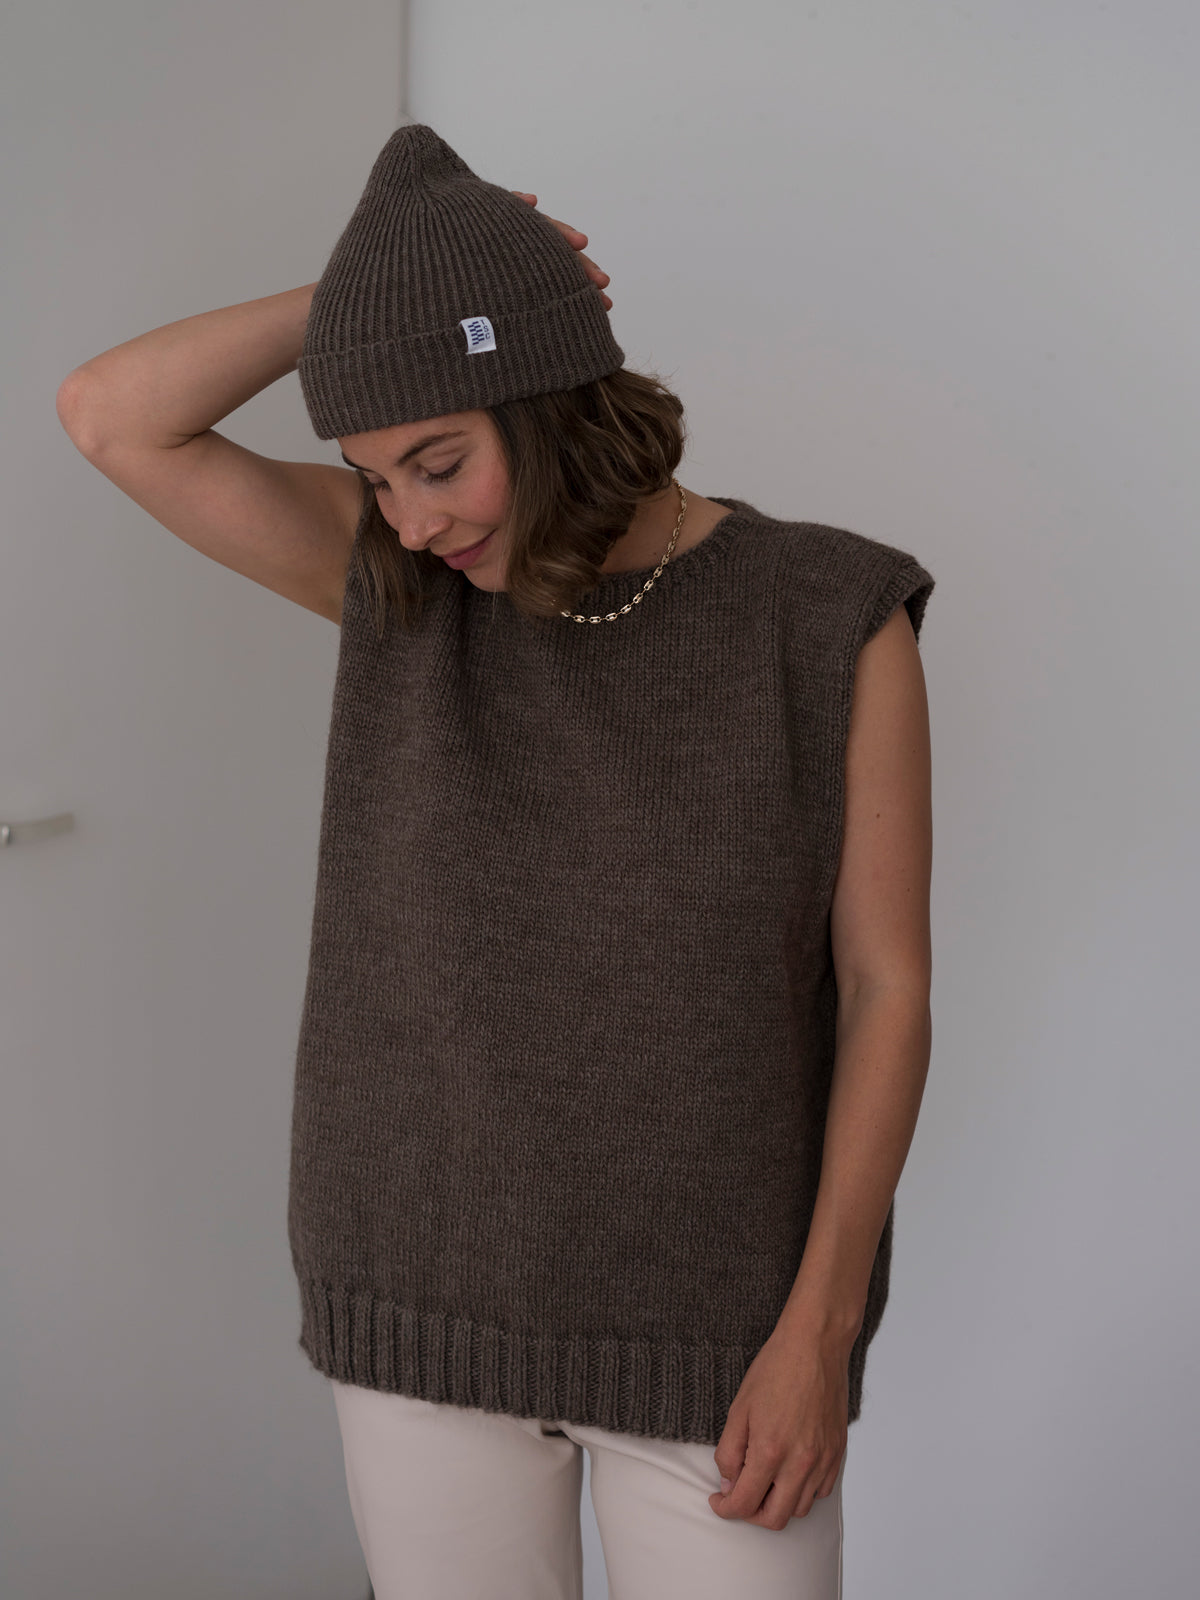 The Beanie Taupe